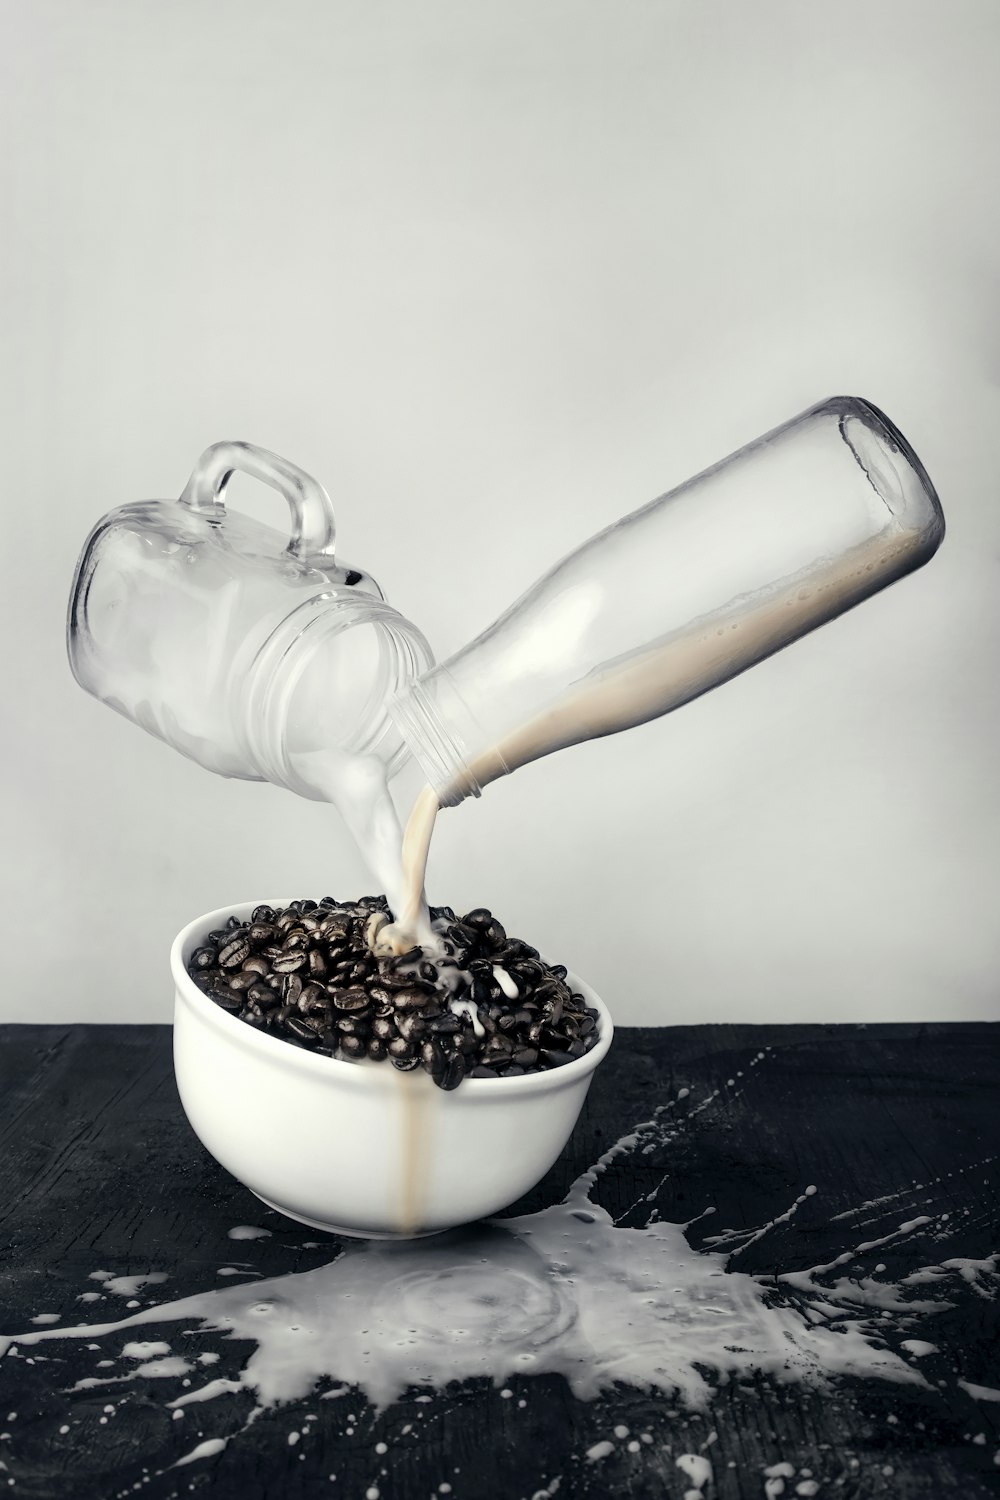 glass bottle and mug jar pouring milk in bowl full of coffee beans